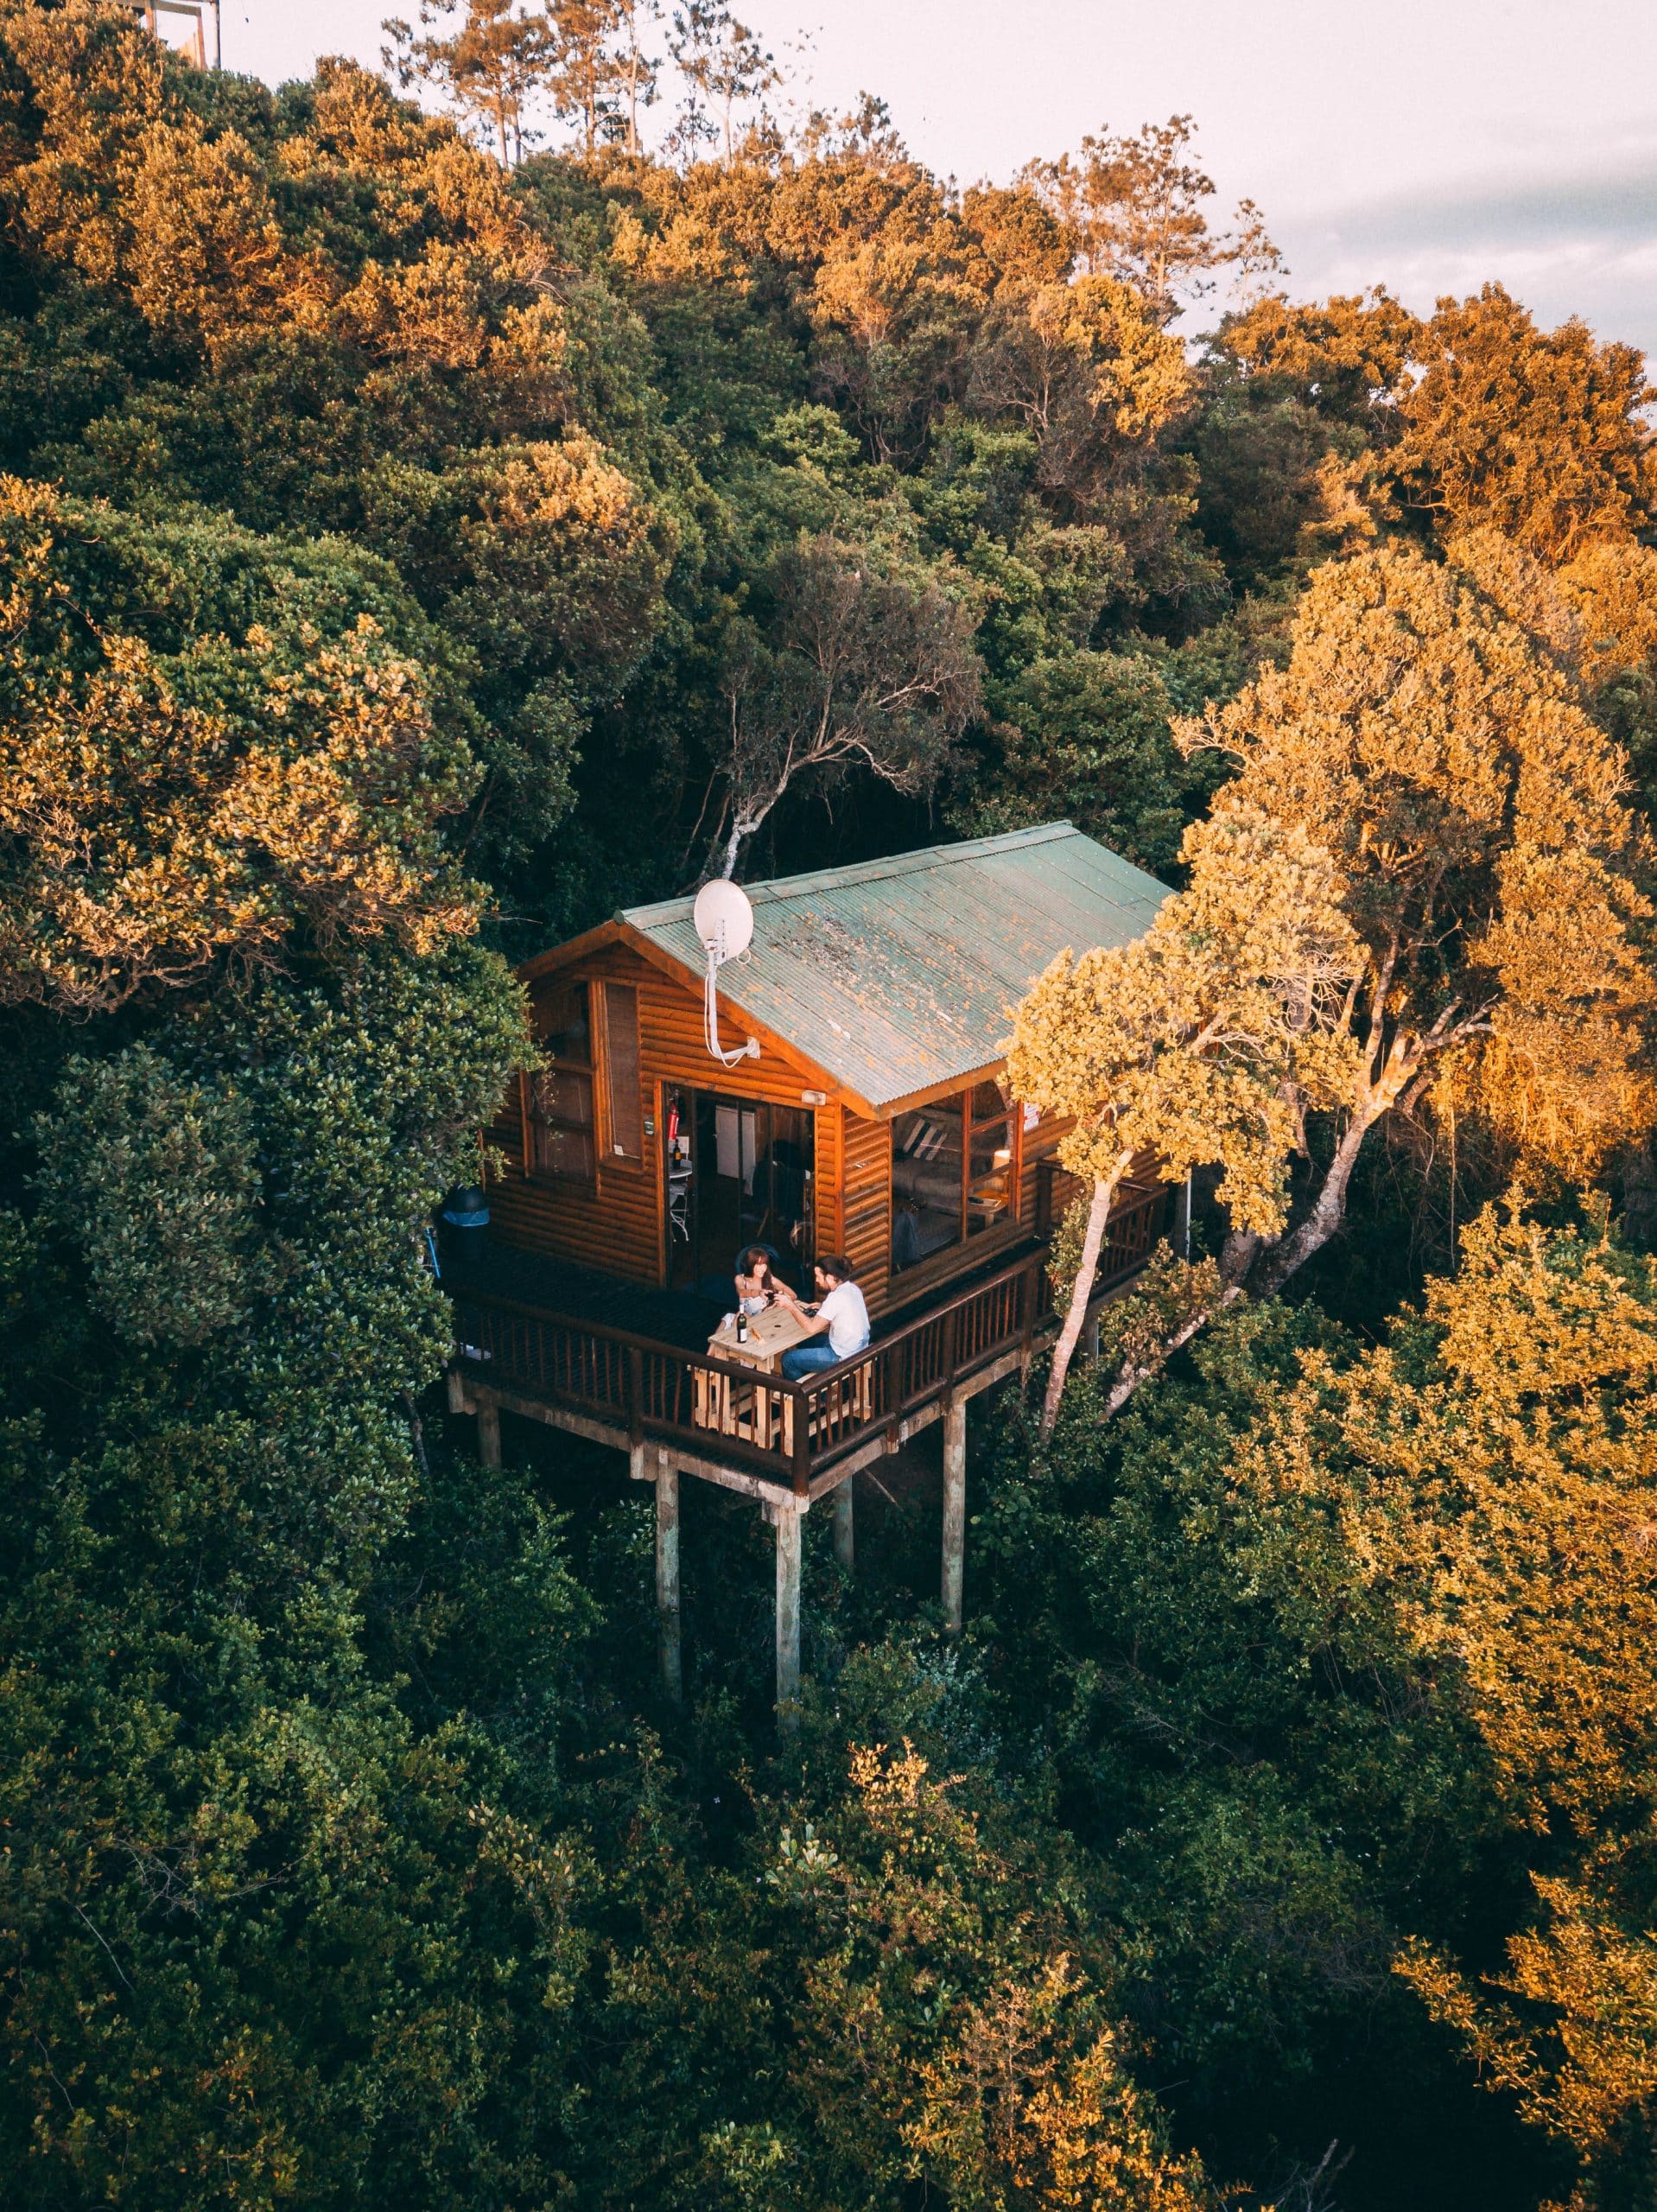 A treehouse lodge surrounded by trees